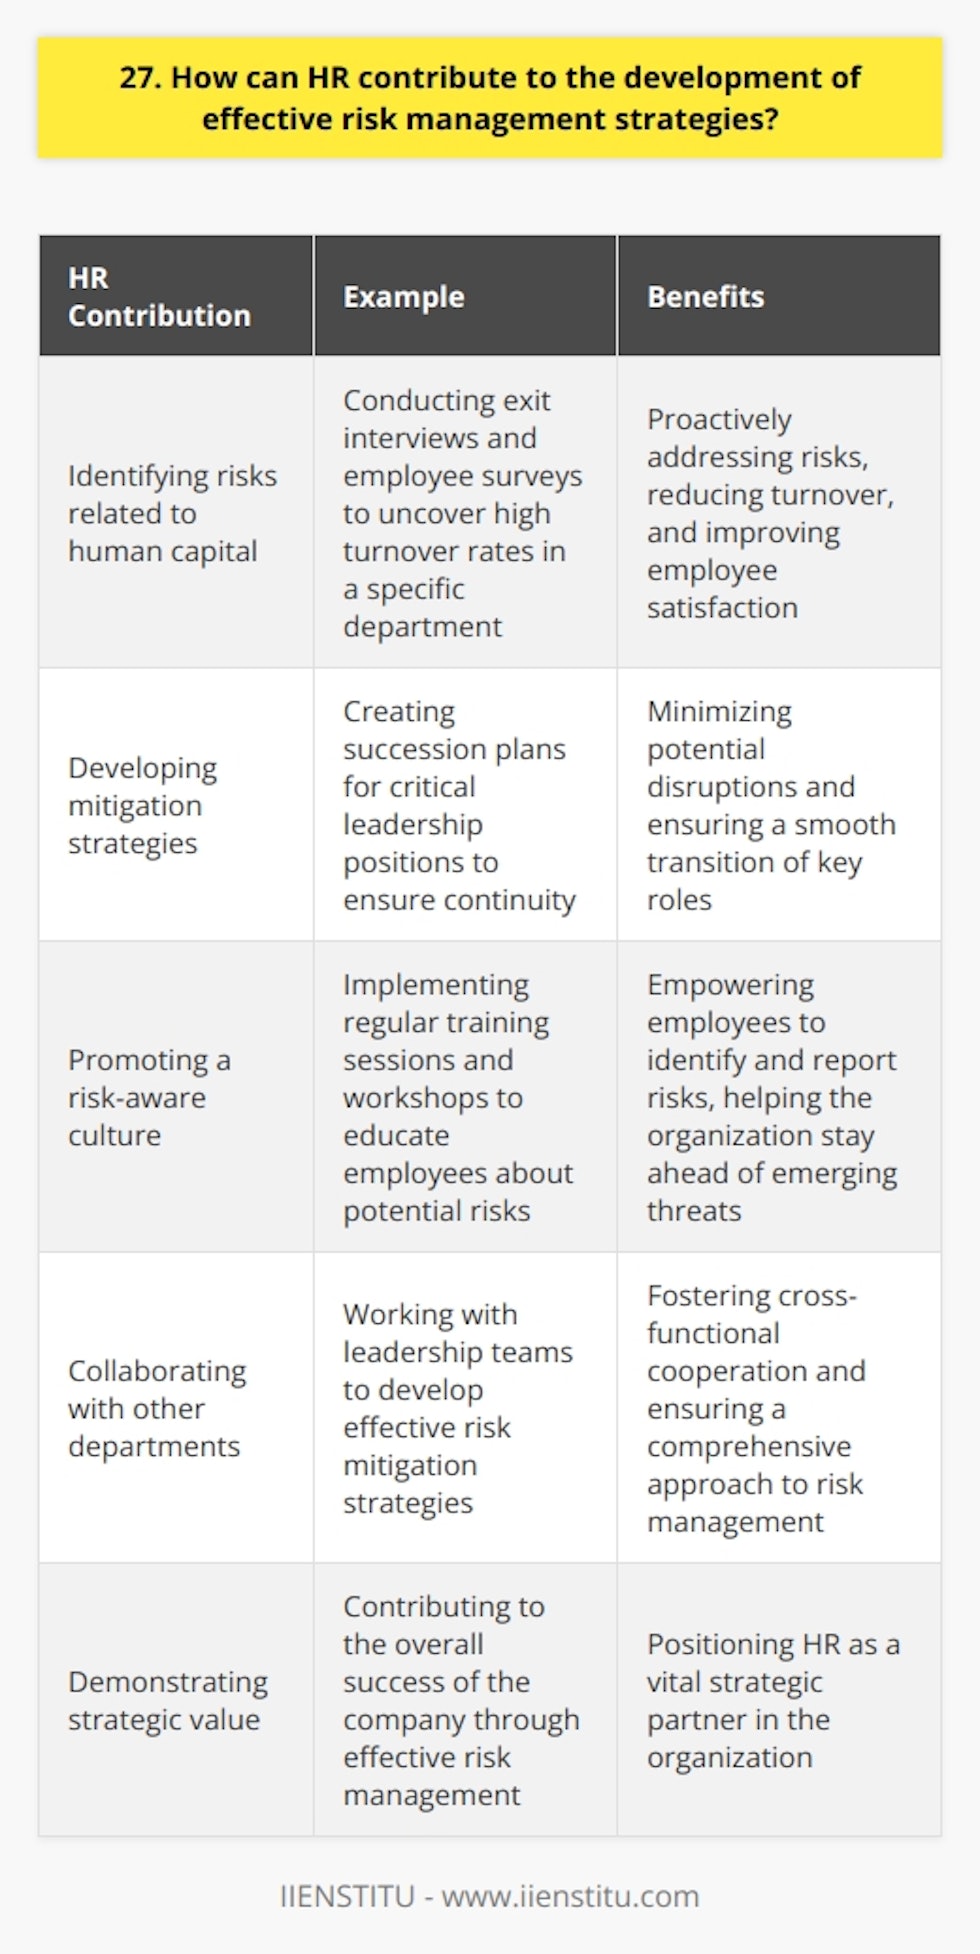 As an HR professional, I believe that we can contribute significantly to the development of effective risk management strategies. In my experience, HR plays a vital role in identifying and mitigating potential risks within an organization. Identifying Risks One of the key ways HR can contribute is by identifying risks related to human capital. This includes risks associated with employee turnover, skills gaps, and succession planning. By conducting regular assessments and analyzing data, HR can proactively identify these risks. For example, in my previous role, we noticed a high turnover rate in a particular department. Through exit interviews and employee surveys, we discovered that the issue stemmed from a lack of career growth opportunities. By addressing this risk, we were able to reduce turnover and improve employee satisfaction. Developing Mitigation Strategies Once risks are identified, HR can work collaboratively with other departments to develop effective mitigation strategies. This may involve implementing training programs to address skills gaps, creating retention strategies to reduce turnover, or developing succession plans to ensure continuity in key roles. In one instance, we identified a potential risk related to a critical leadership position. The current leader was nearing retirement, and there was no clear successor. We worked with the leadership team to create a succession plan, identifying and grooming internal candidates to take on the role in the future. Promoting a Risk-Aware Culture HR can also contribute to risk management by promoting a culture of risk awareness throughout the organization. This involves educating employees about potential risks, encouraging open communication, and fostering a proactive approach to risk mitigation. In my experience, regular training sessions and workshops can be effective in raising risk awareness. By empowering employees to identify and report potential risks, the organization can stay ahead of emerging threats. Conclusion In summary, HR plays a crucial role in developing effective risk management strategies. By identifying risks, developing mitigation plans, and promoting a risk-aware culture, HR can help protect the organization and its employees from potential harm. Its an area where HR can truly demonstrate its strategic value and contribute to the overall success of the company.